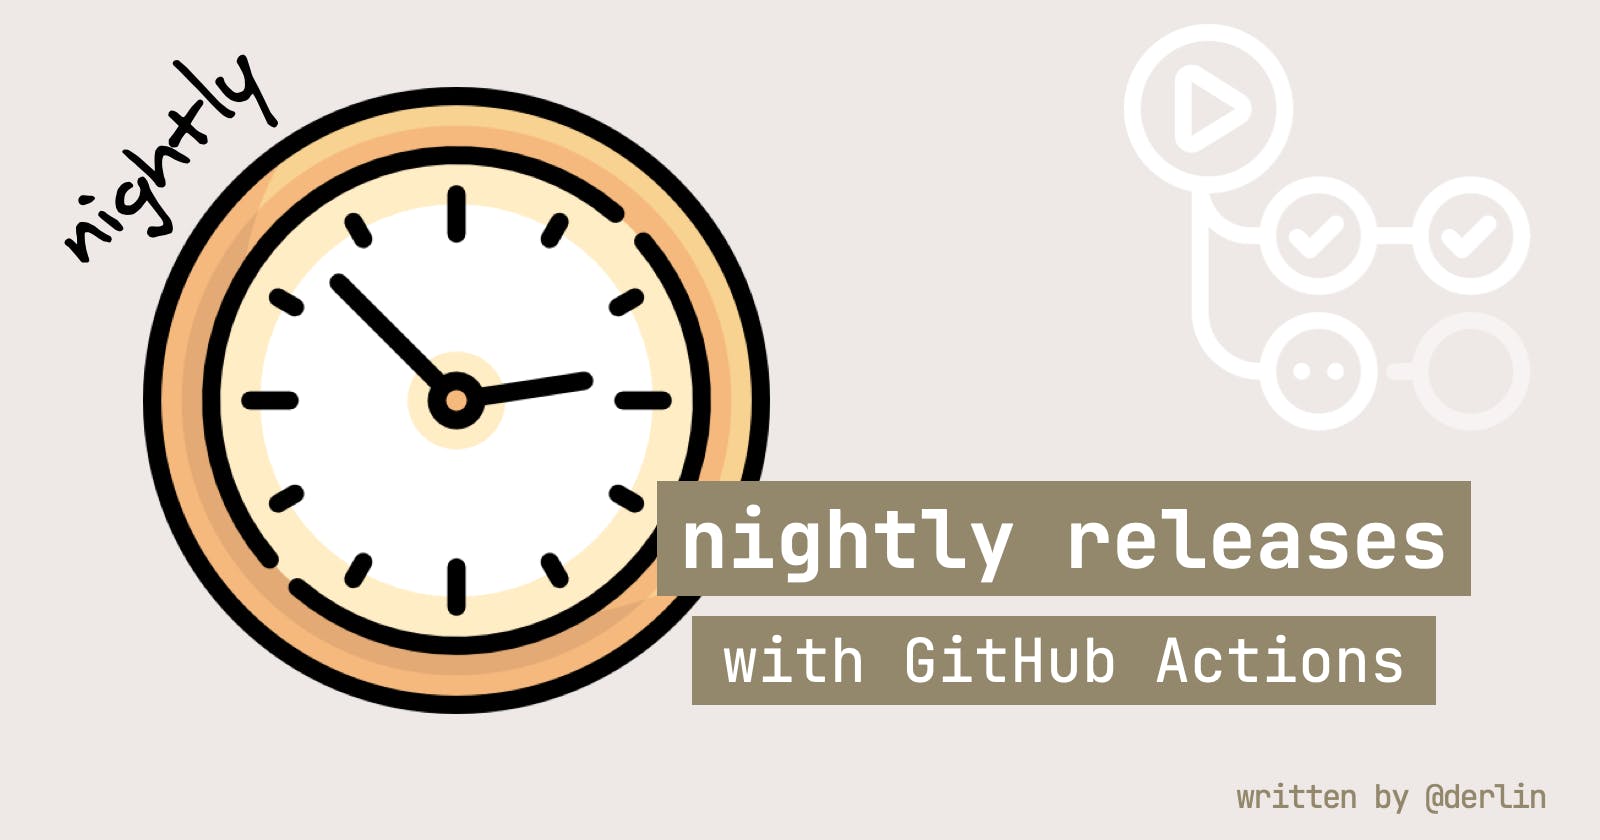 How to create nightly releases with Github Actions